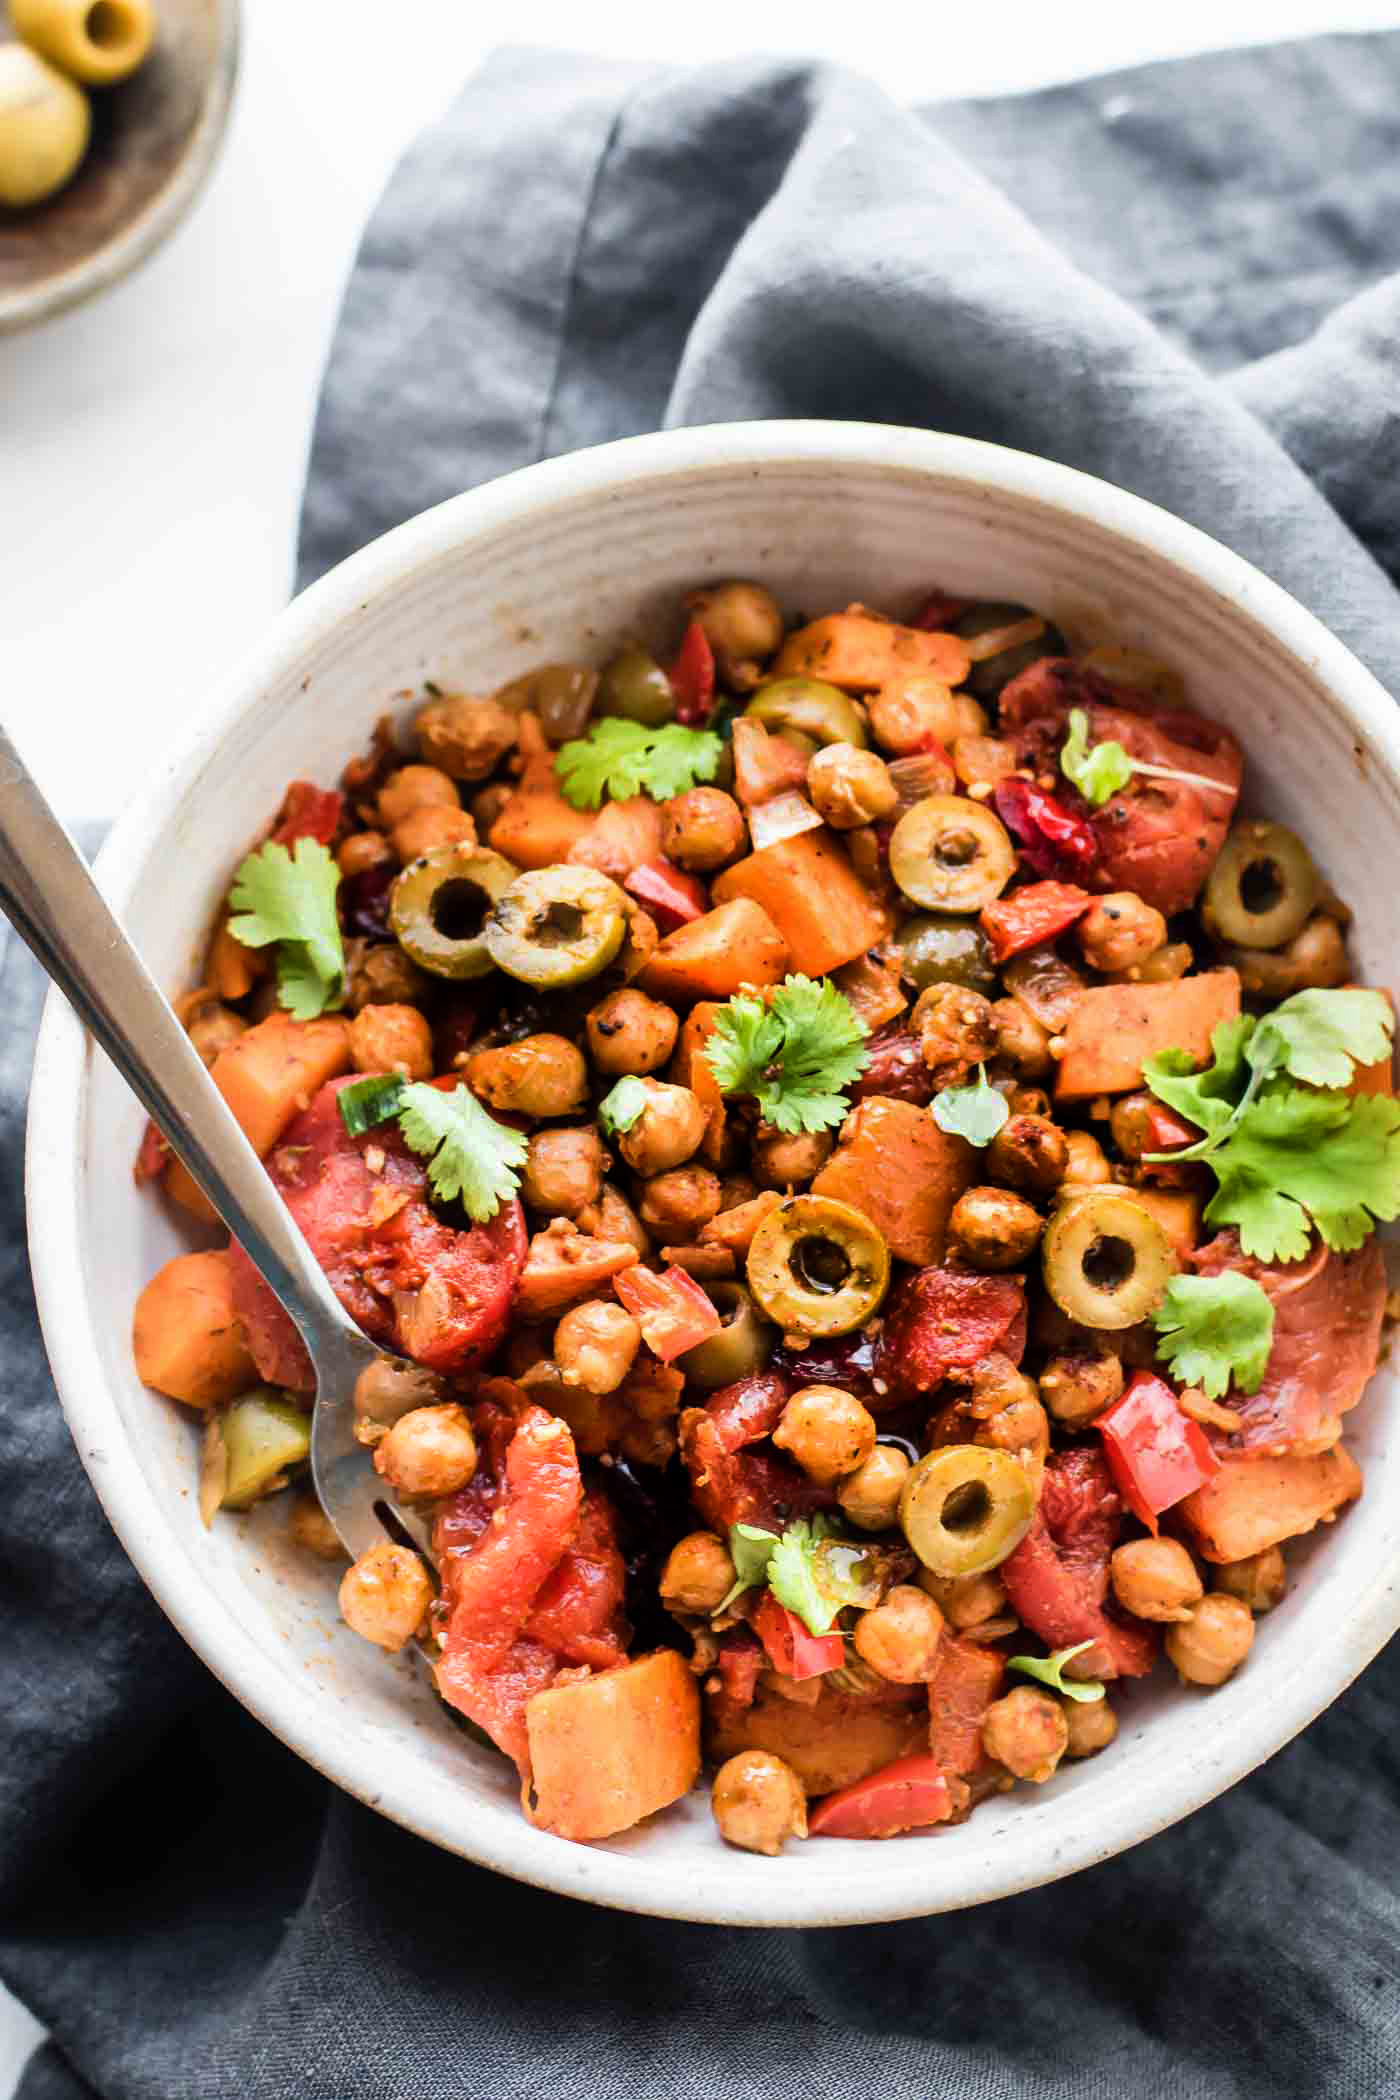 These Cuban Sweet Potato Picadillo Bowls make for a wholesome Latin-inspired weeknight meal! This vegan picadillo recipe is the perfect combo of sweet and savory. Stewed Tomatoes, roasted chickpeas, sweet potatoes, olives, raisins, and spices! Simple healthy ingredients made into a flavorful one pot meal. Gluten free, grain free, EASY!